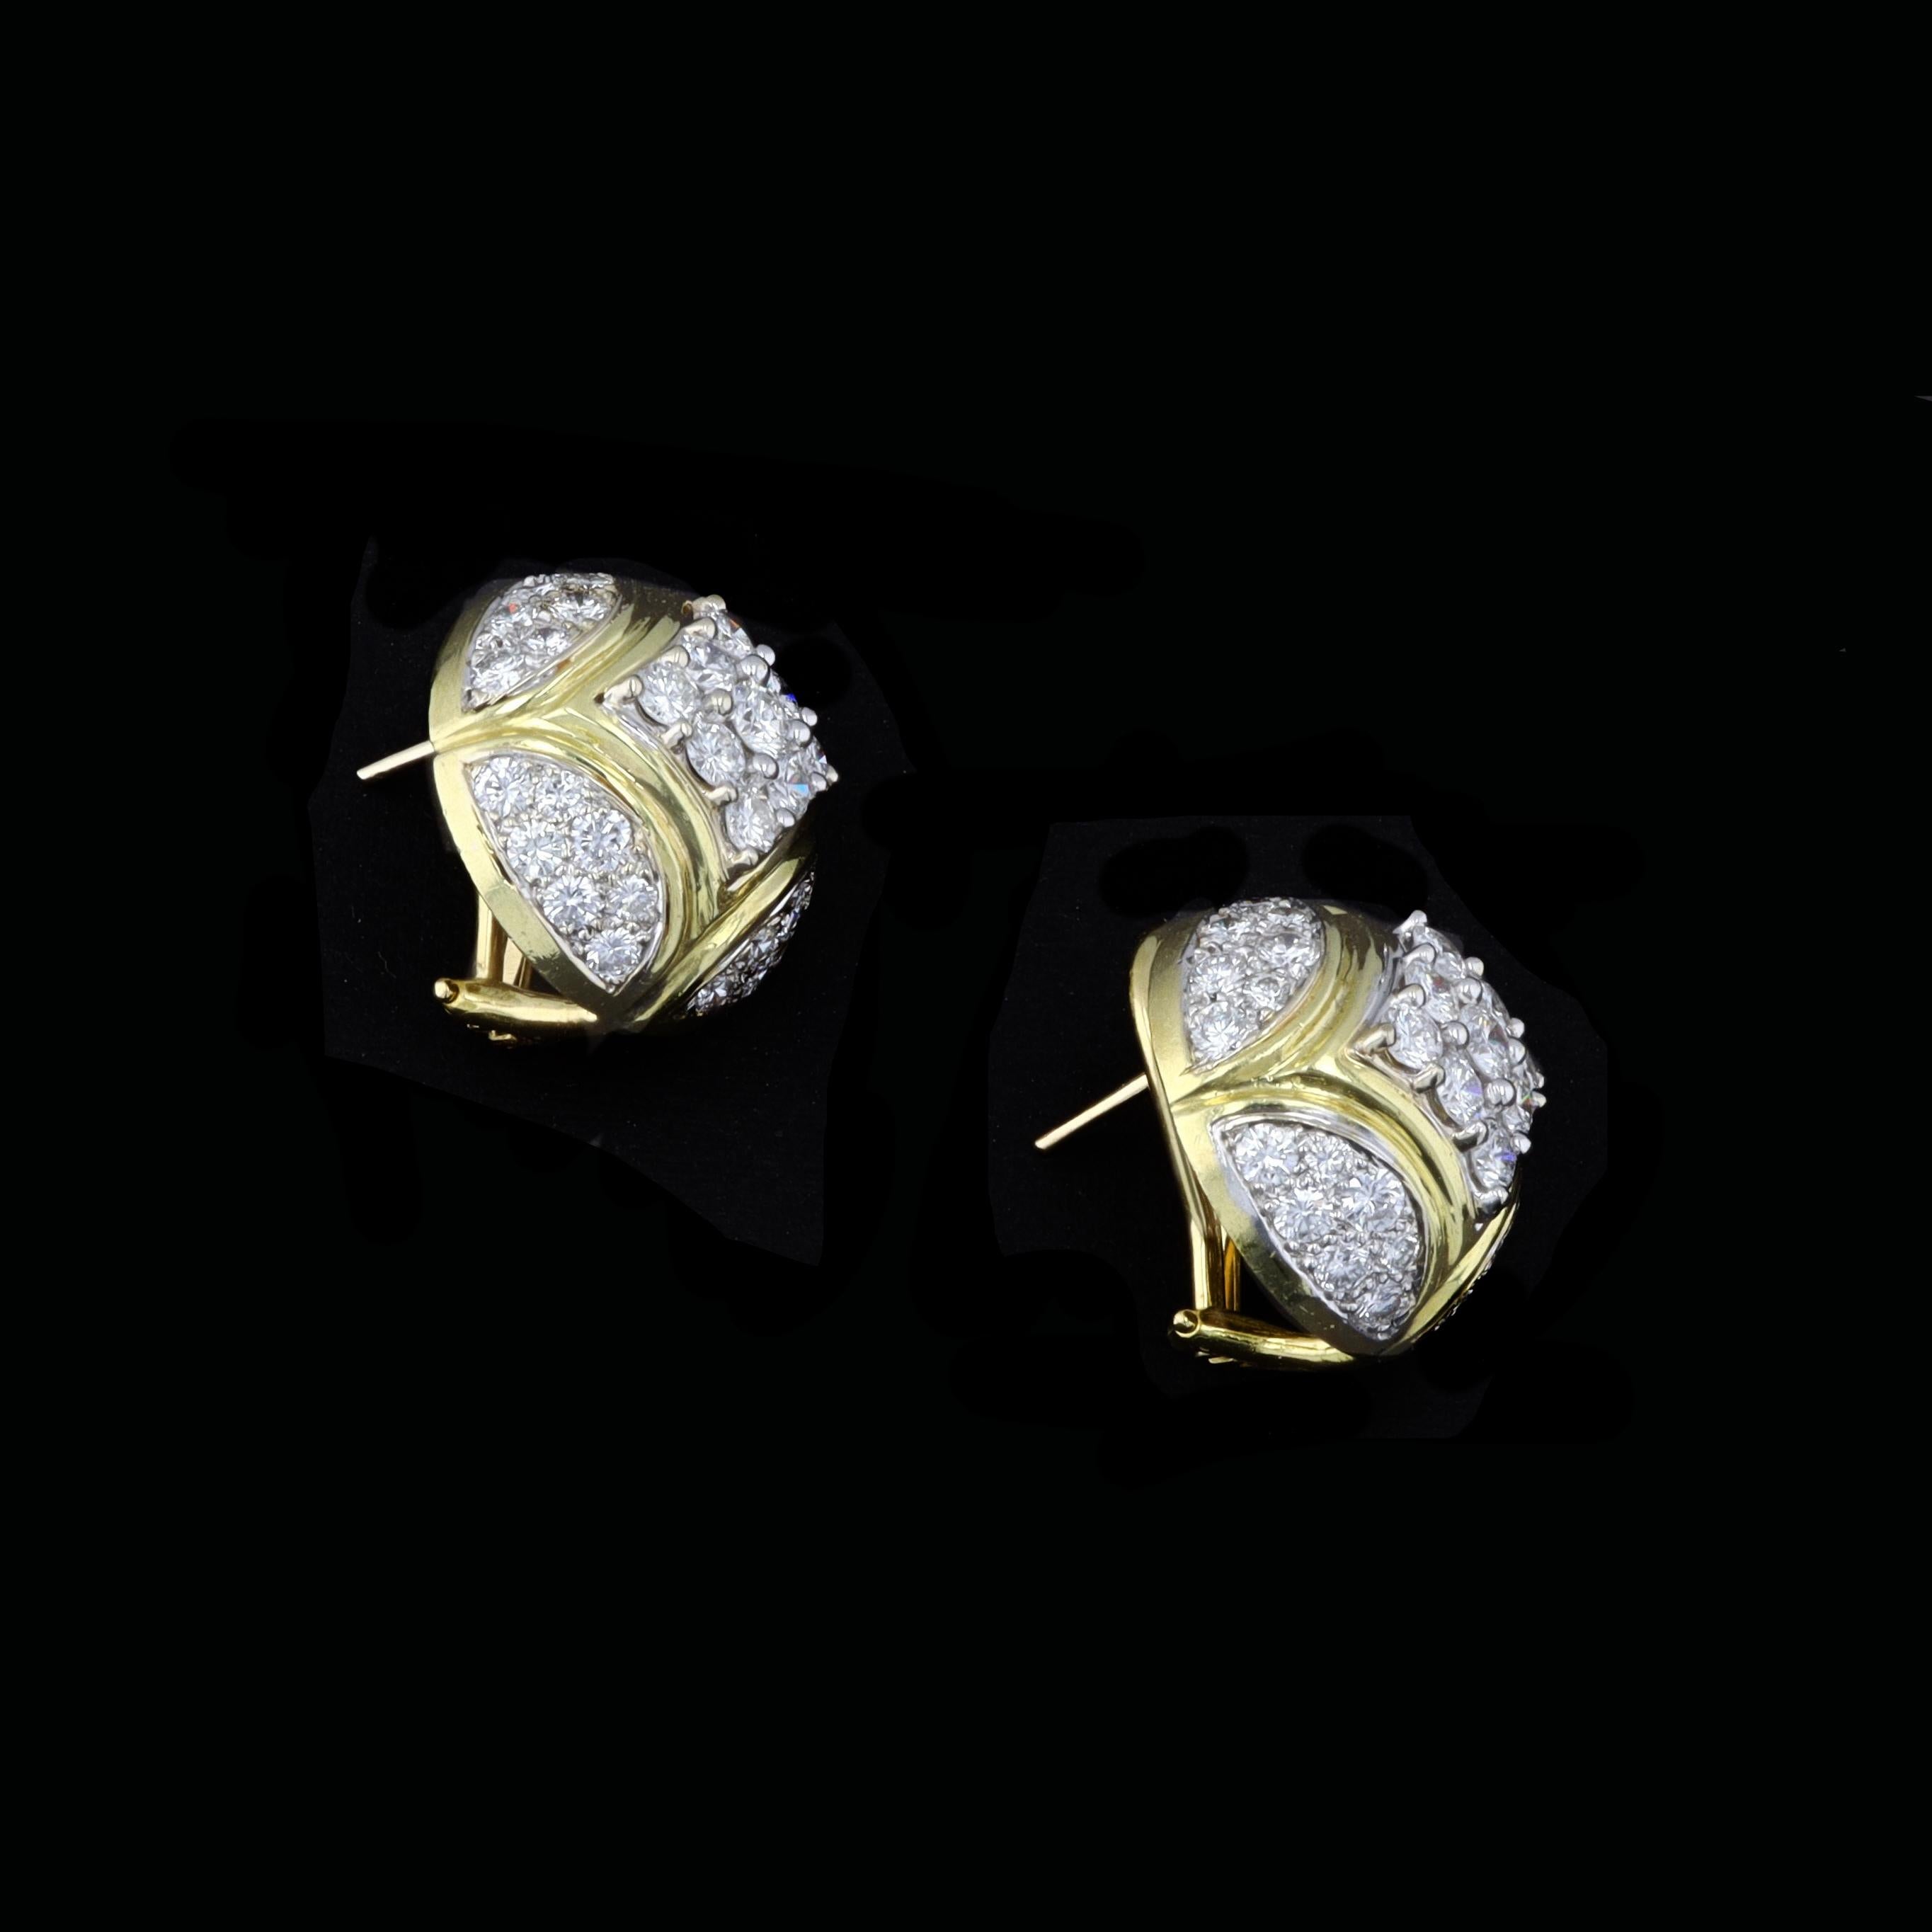 This beautiful pair of antique earrings are the perfect addition to any wardrobe. These earrings are set in 18K yellow and white gold. The earrings feature sparkling round cut diamonds that weigh approximately 3.50 carats total weight.

